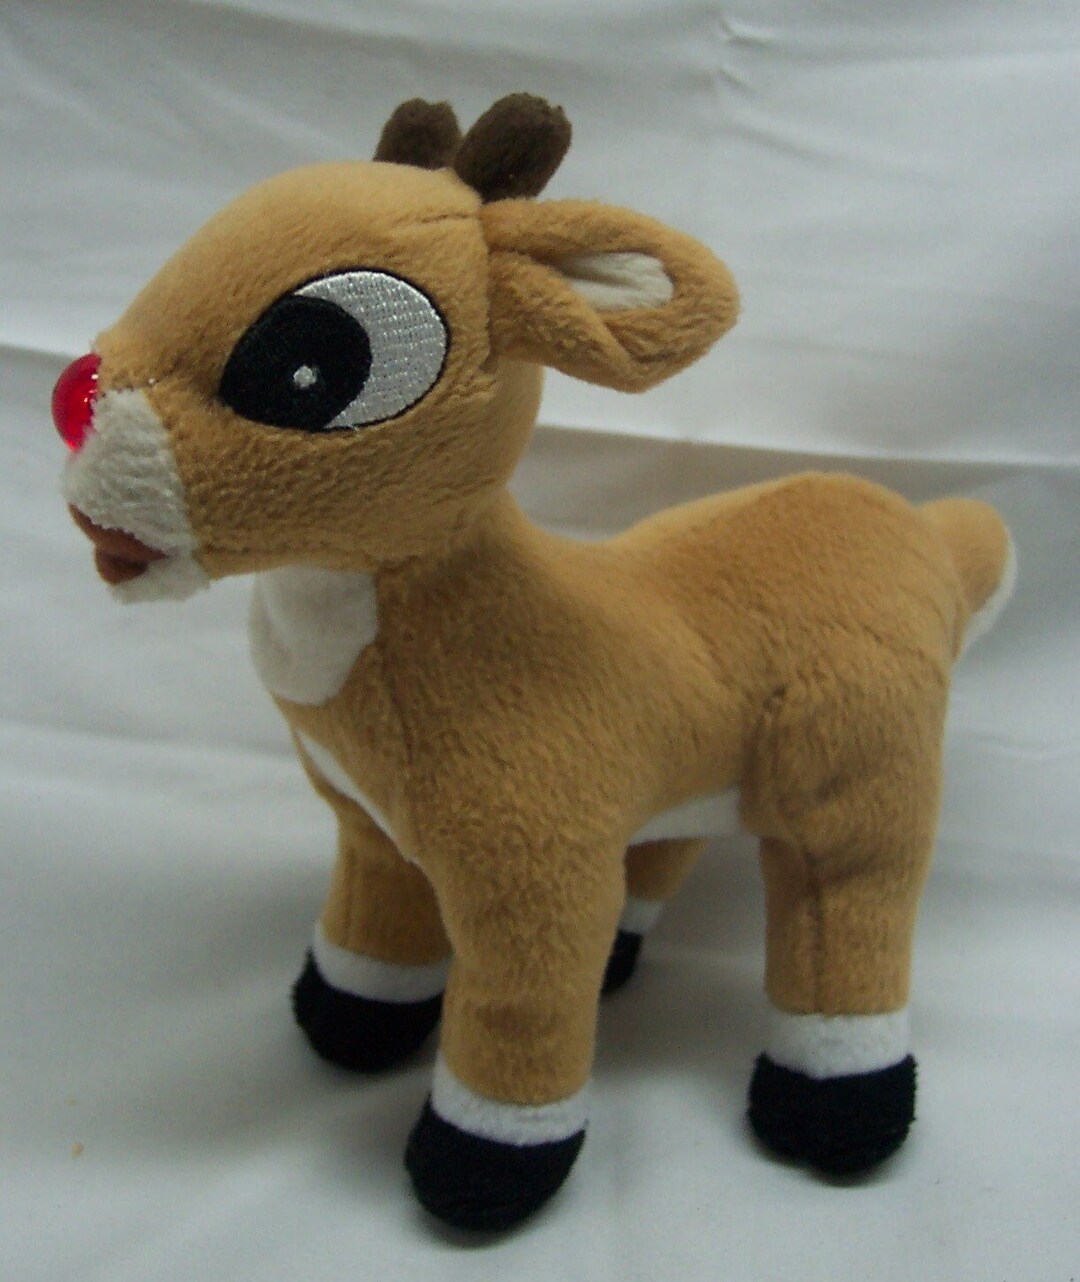 VINTAGE RUDOLPH THE RED NOSED REINDEER SINGING PLUSH TOY 1977